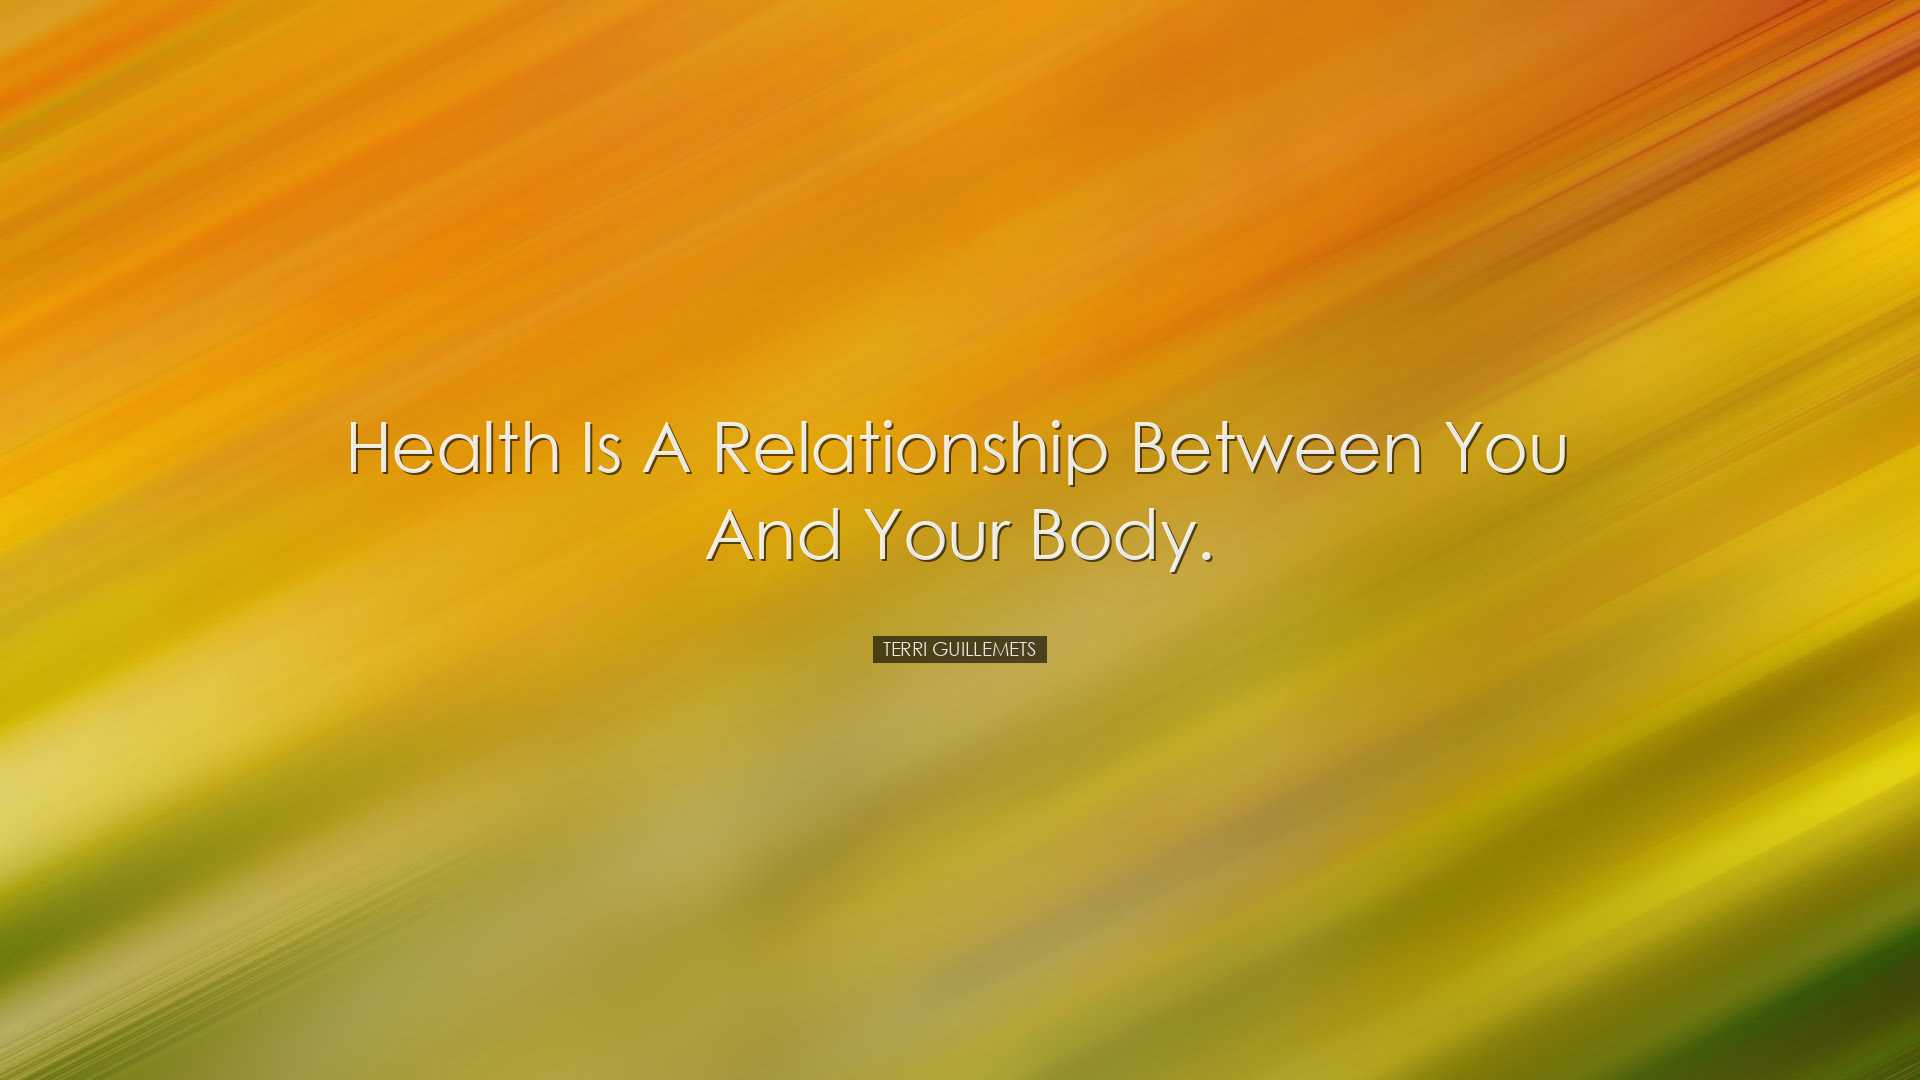 Health is a relationship between you and your body. - Terri Guille